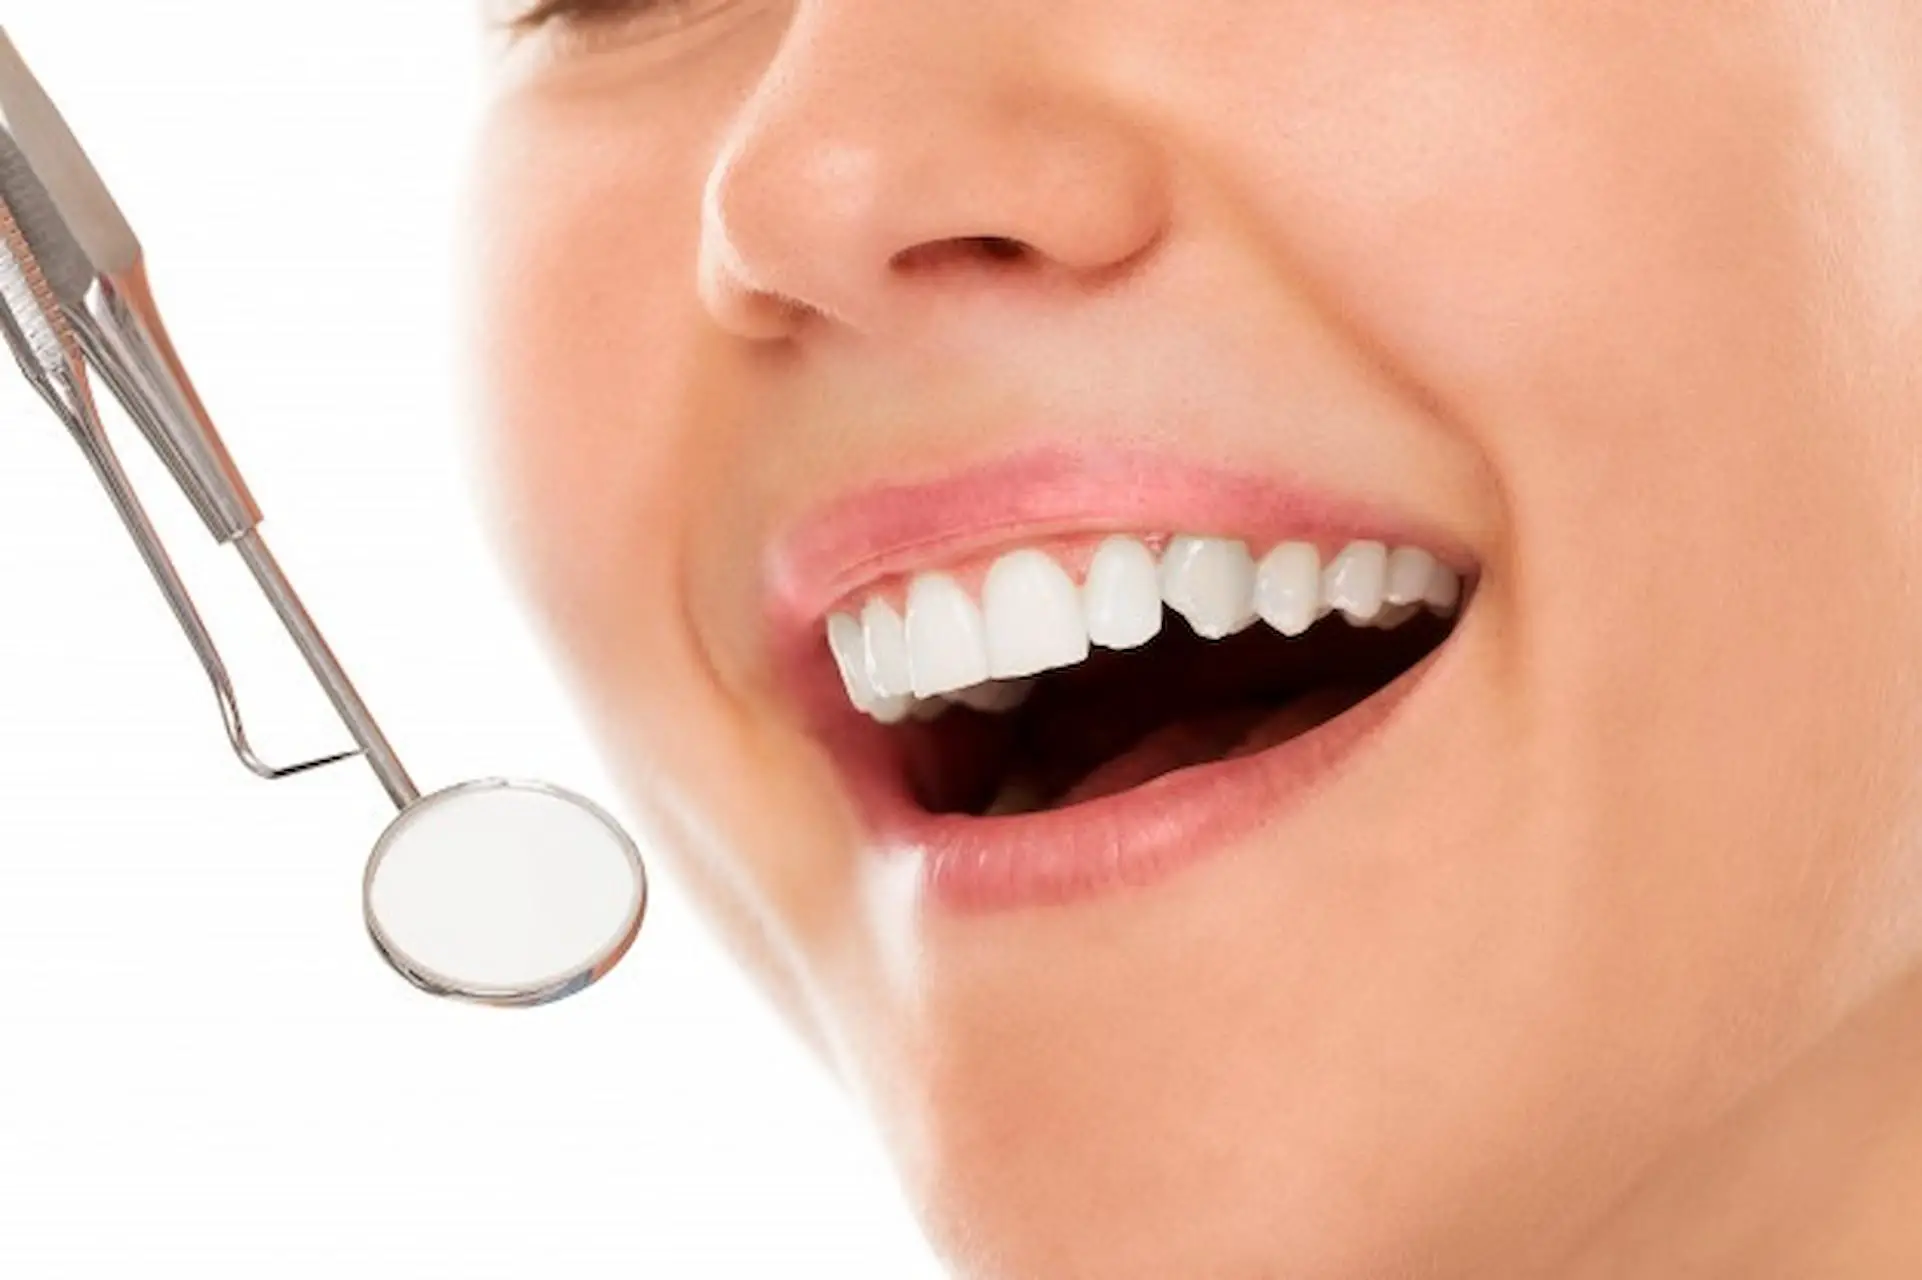 Gum Recontouring Can Reduce A “Gummy Smile”